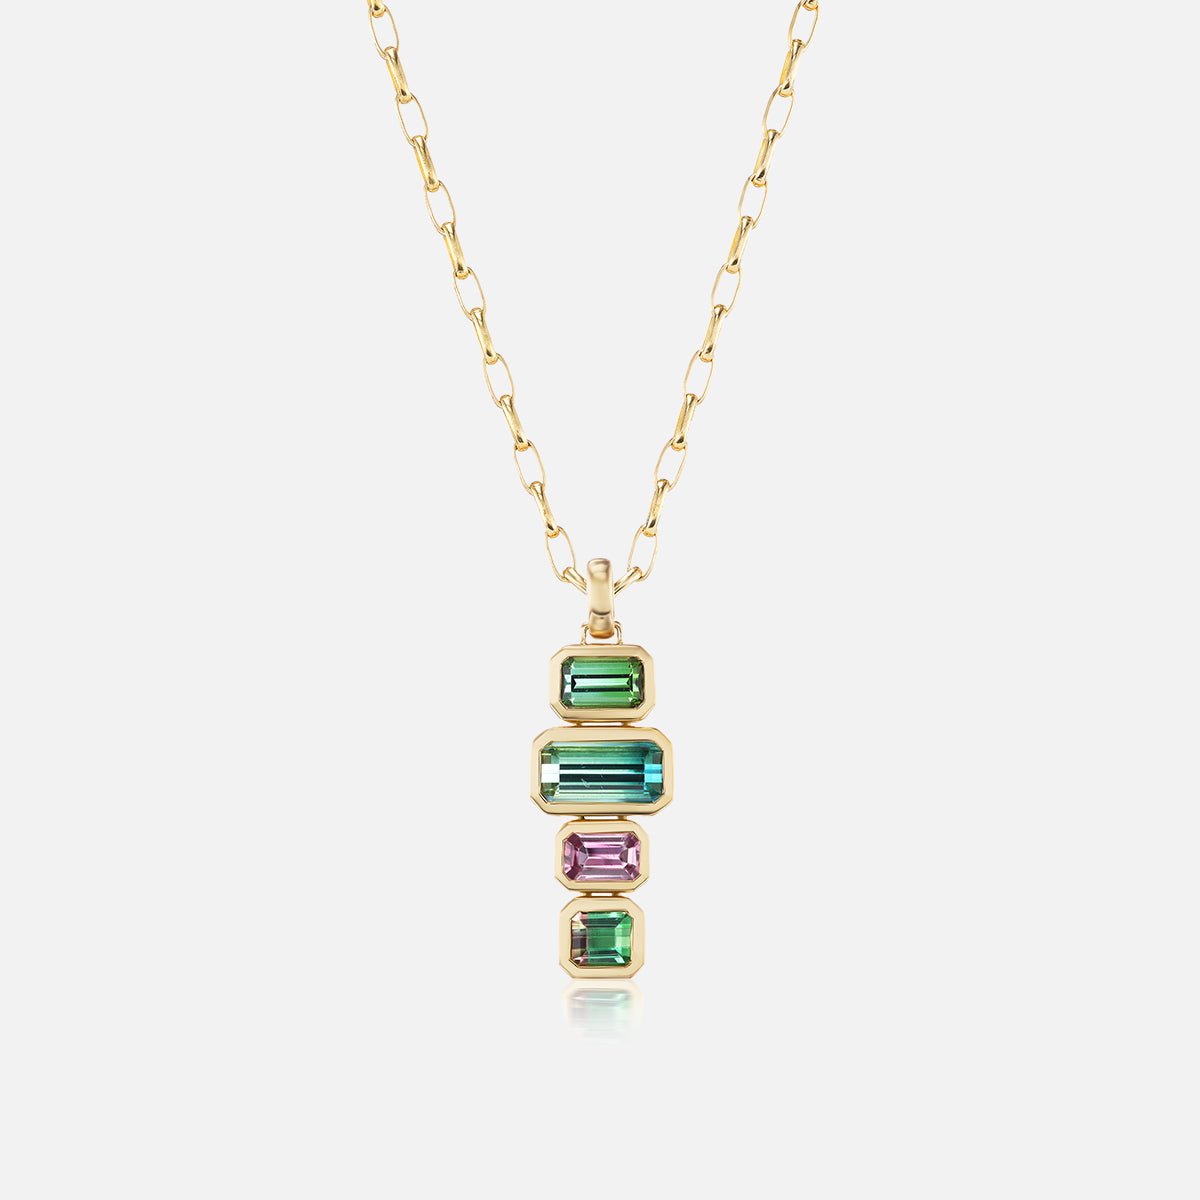 The Stack Necklace